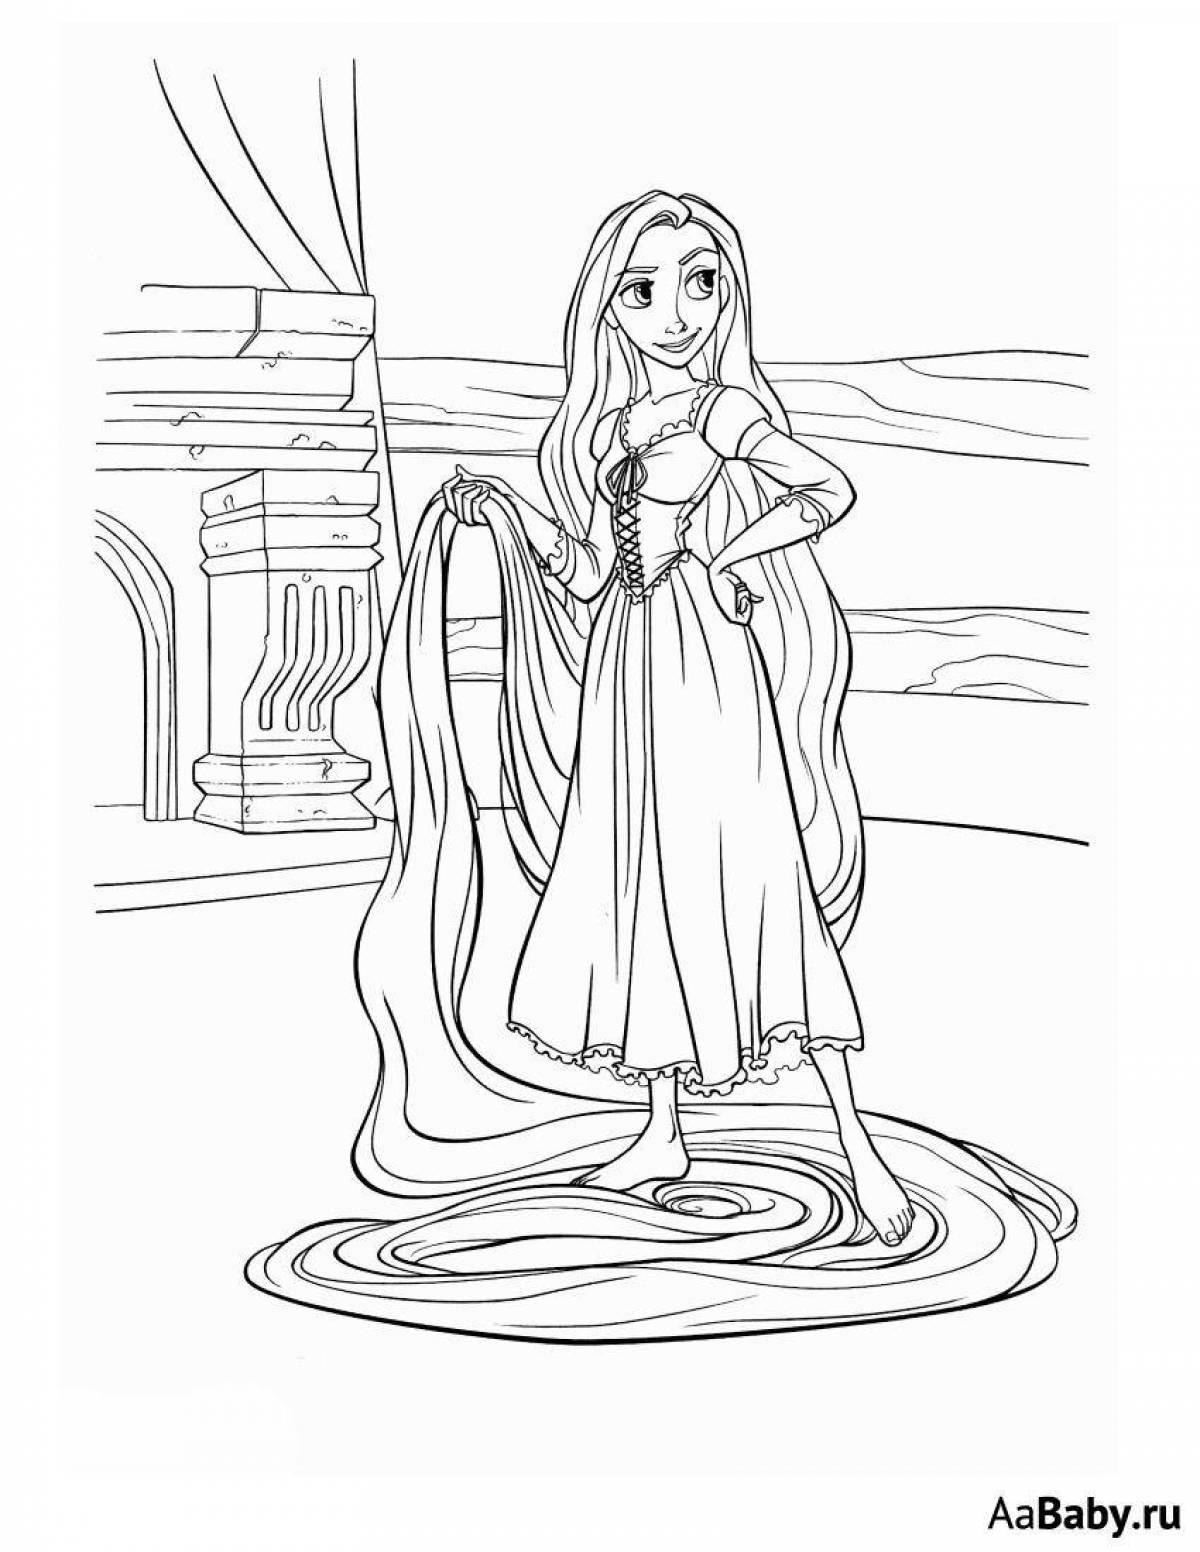 Rapunzel coloring book for girls